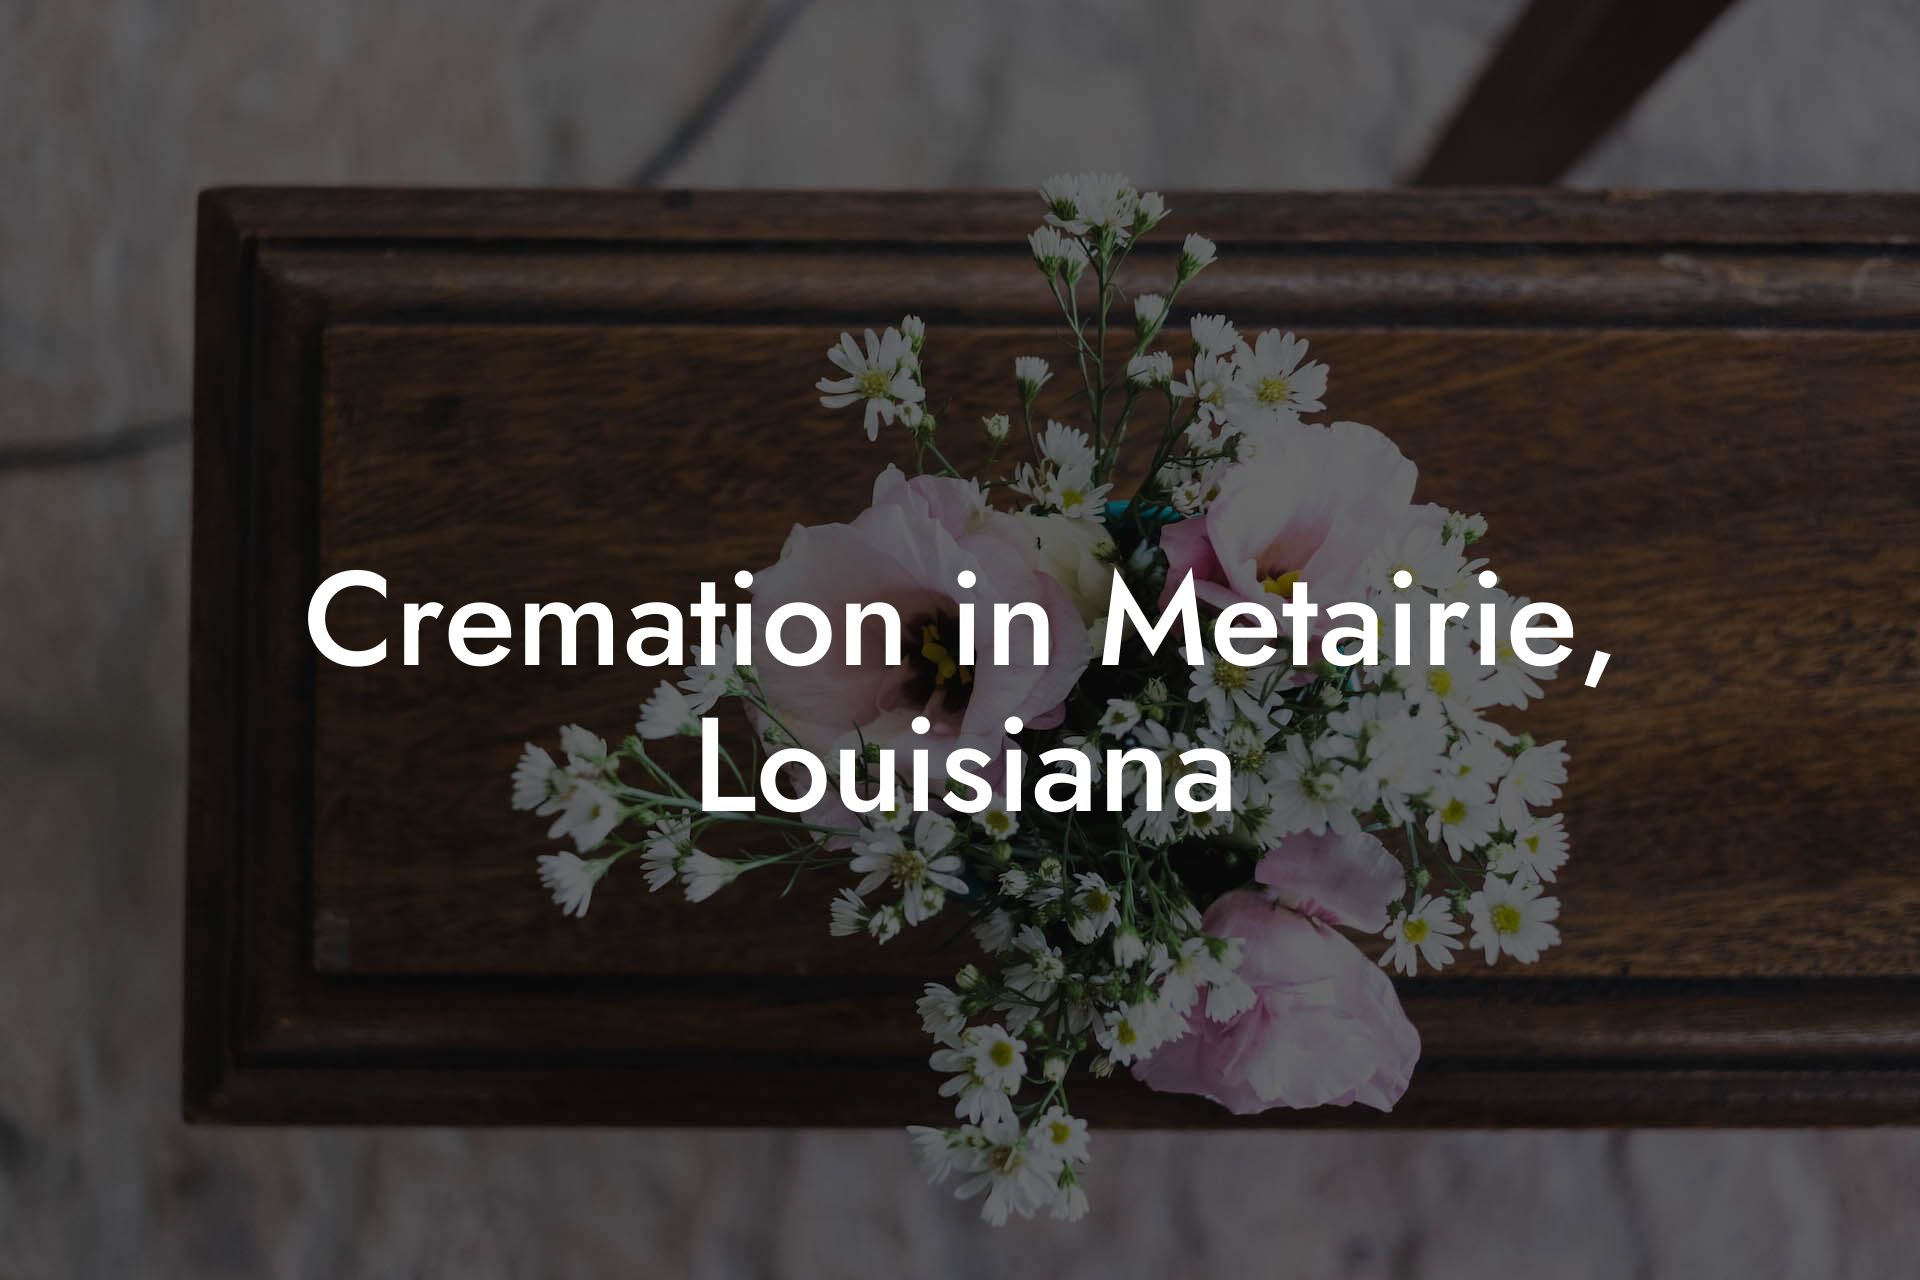 Cremation in Metairie, Louisiana